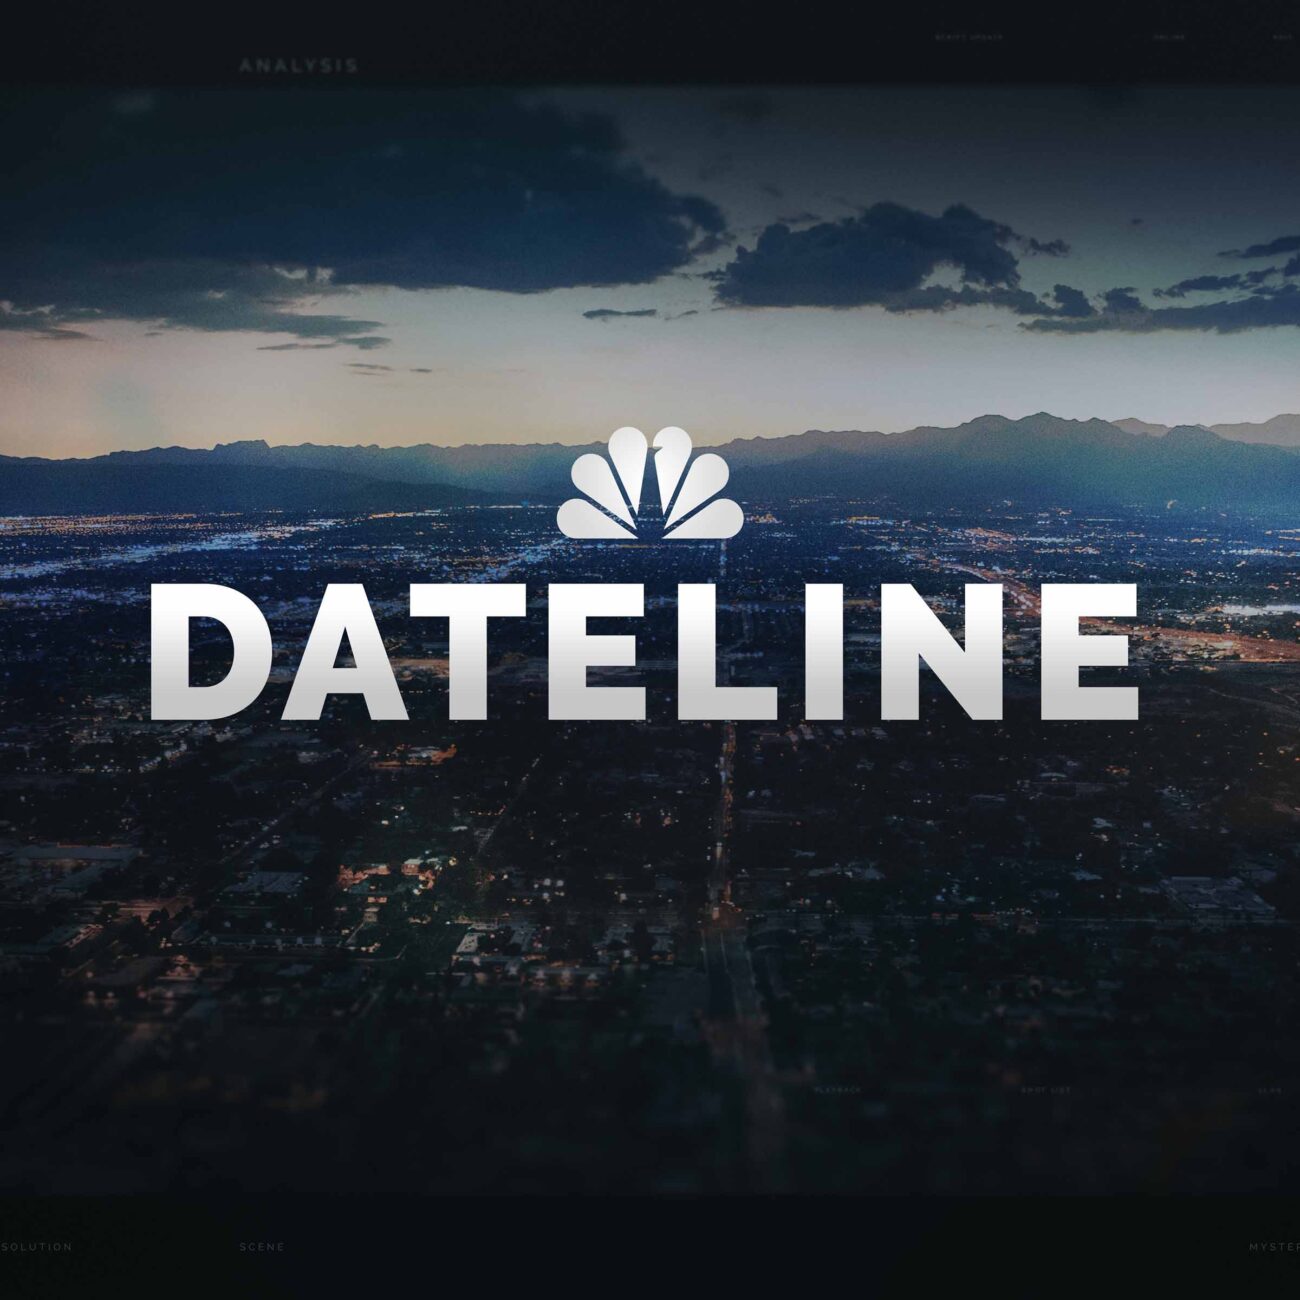 'Dateline' is a show which has aired on the television network NBC since 1992. Here are the best 'Dateline' episodes of 2020 so far.